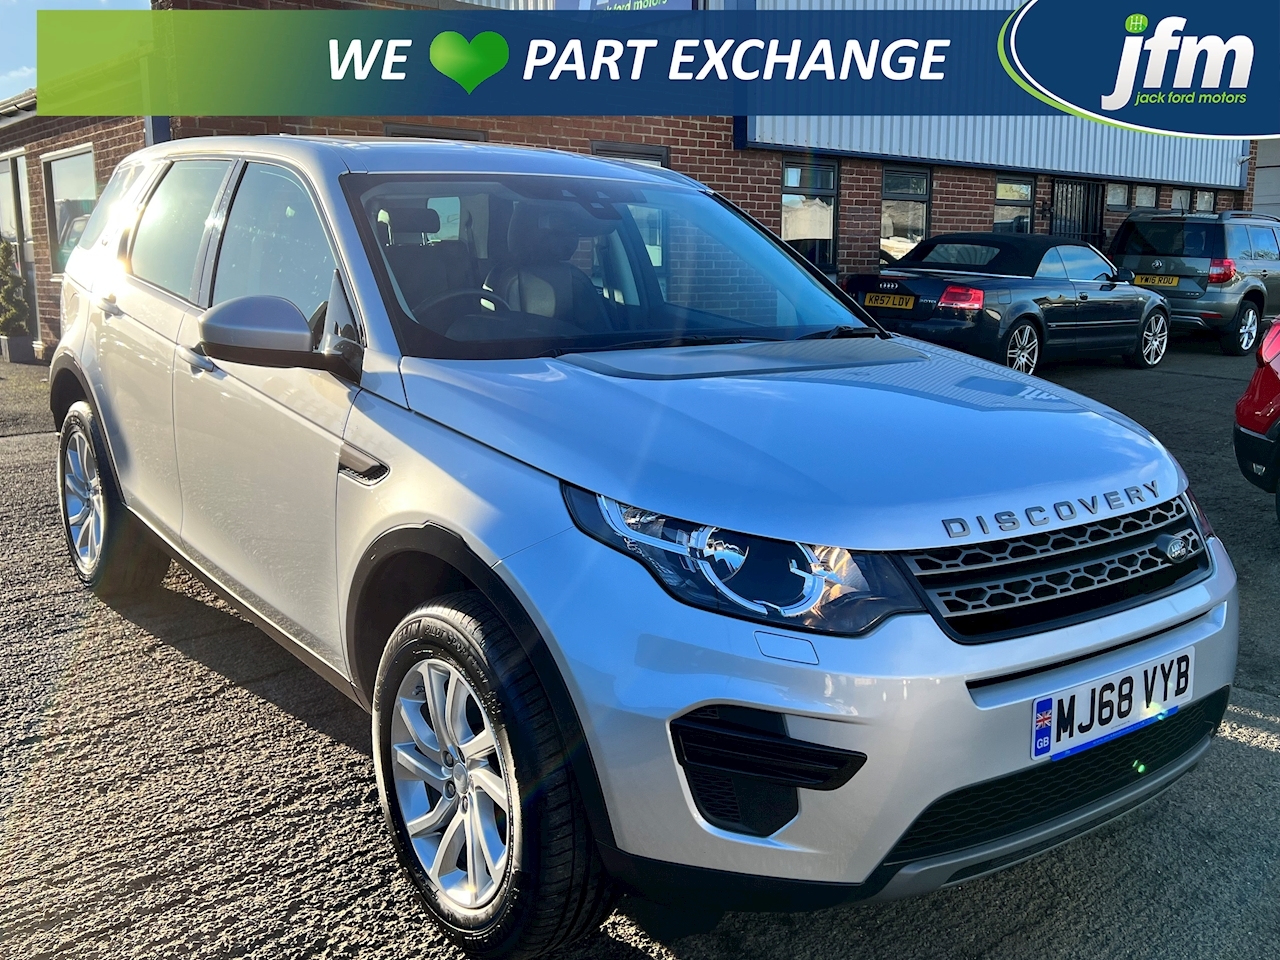 Discovery Sport 2.0 TD4 [180] SE [7-Seat] AWD 2.0 5dr Estate Manual Diesel